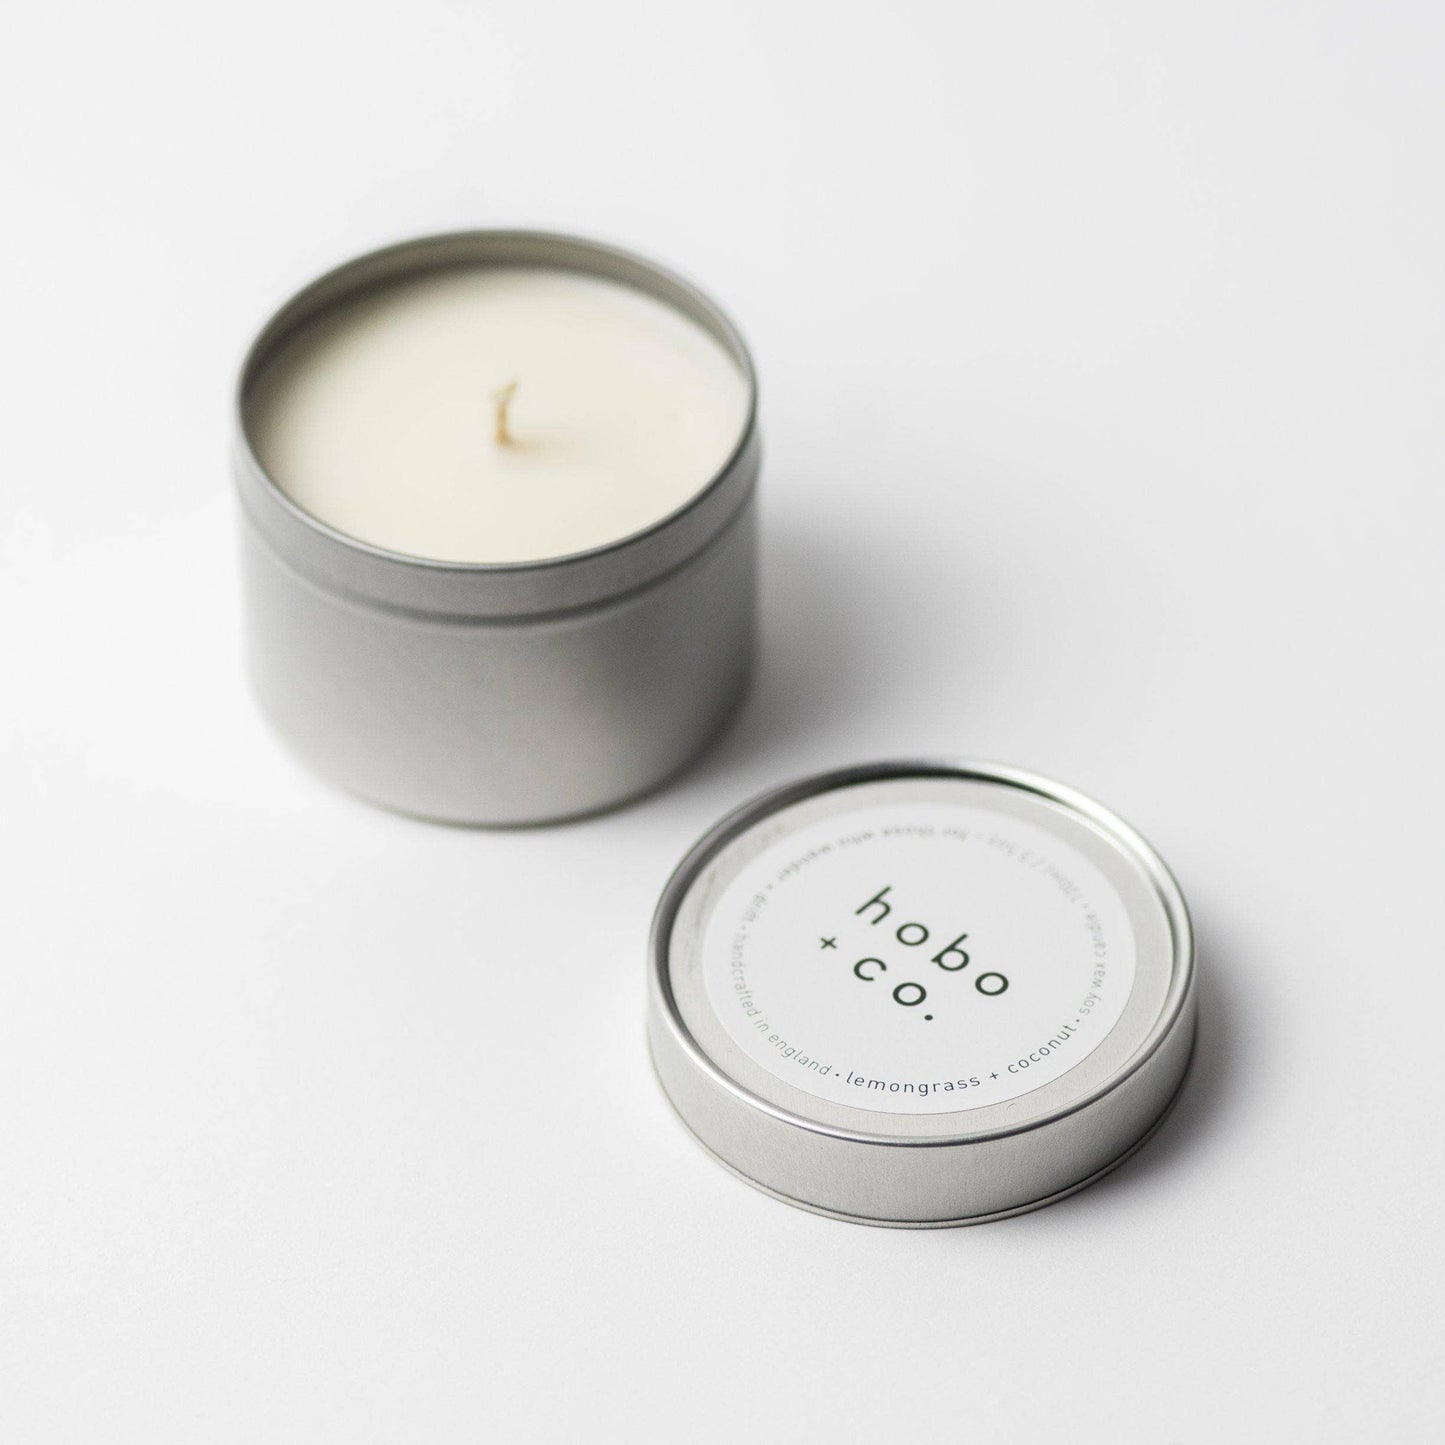 Hobo+Co Lemongrass & Coconut Travel Tin Soy Wax Candle at Joetie Home Fragrance. Luxury Handmade Apothecary Soy Candles